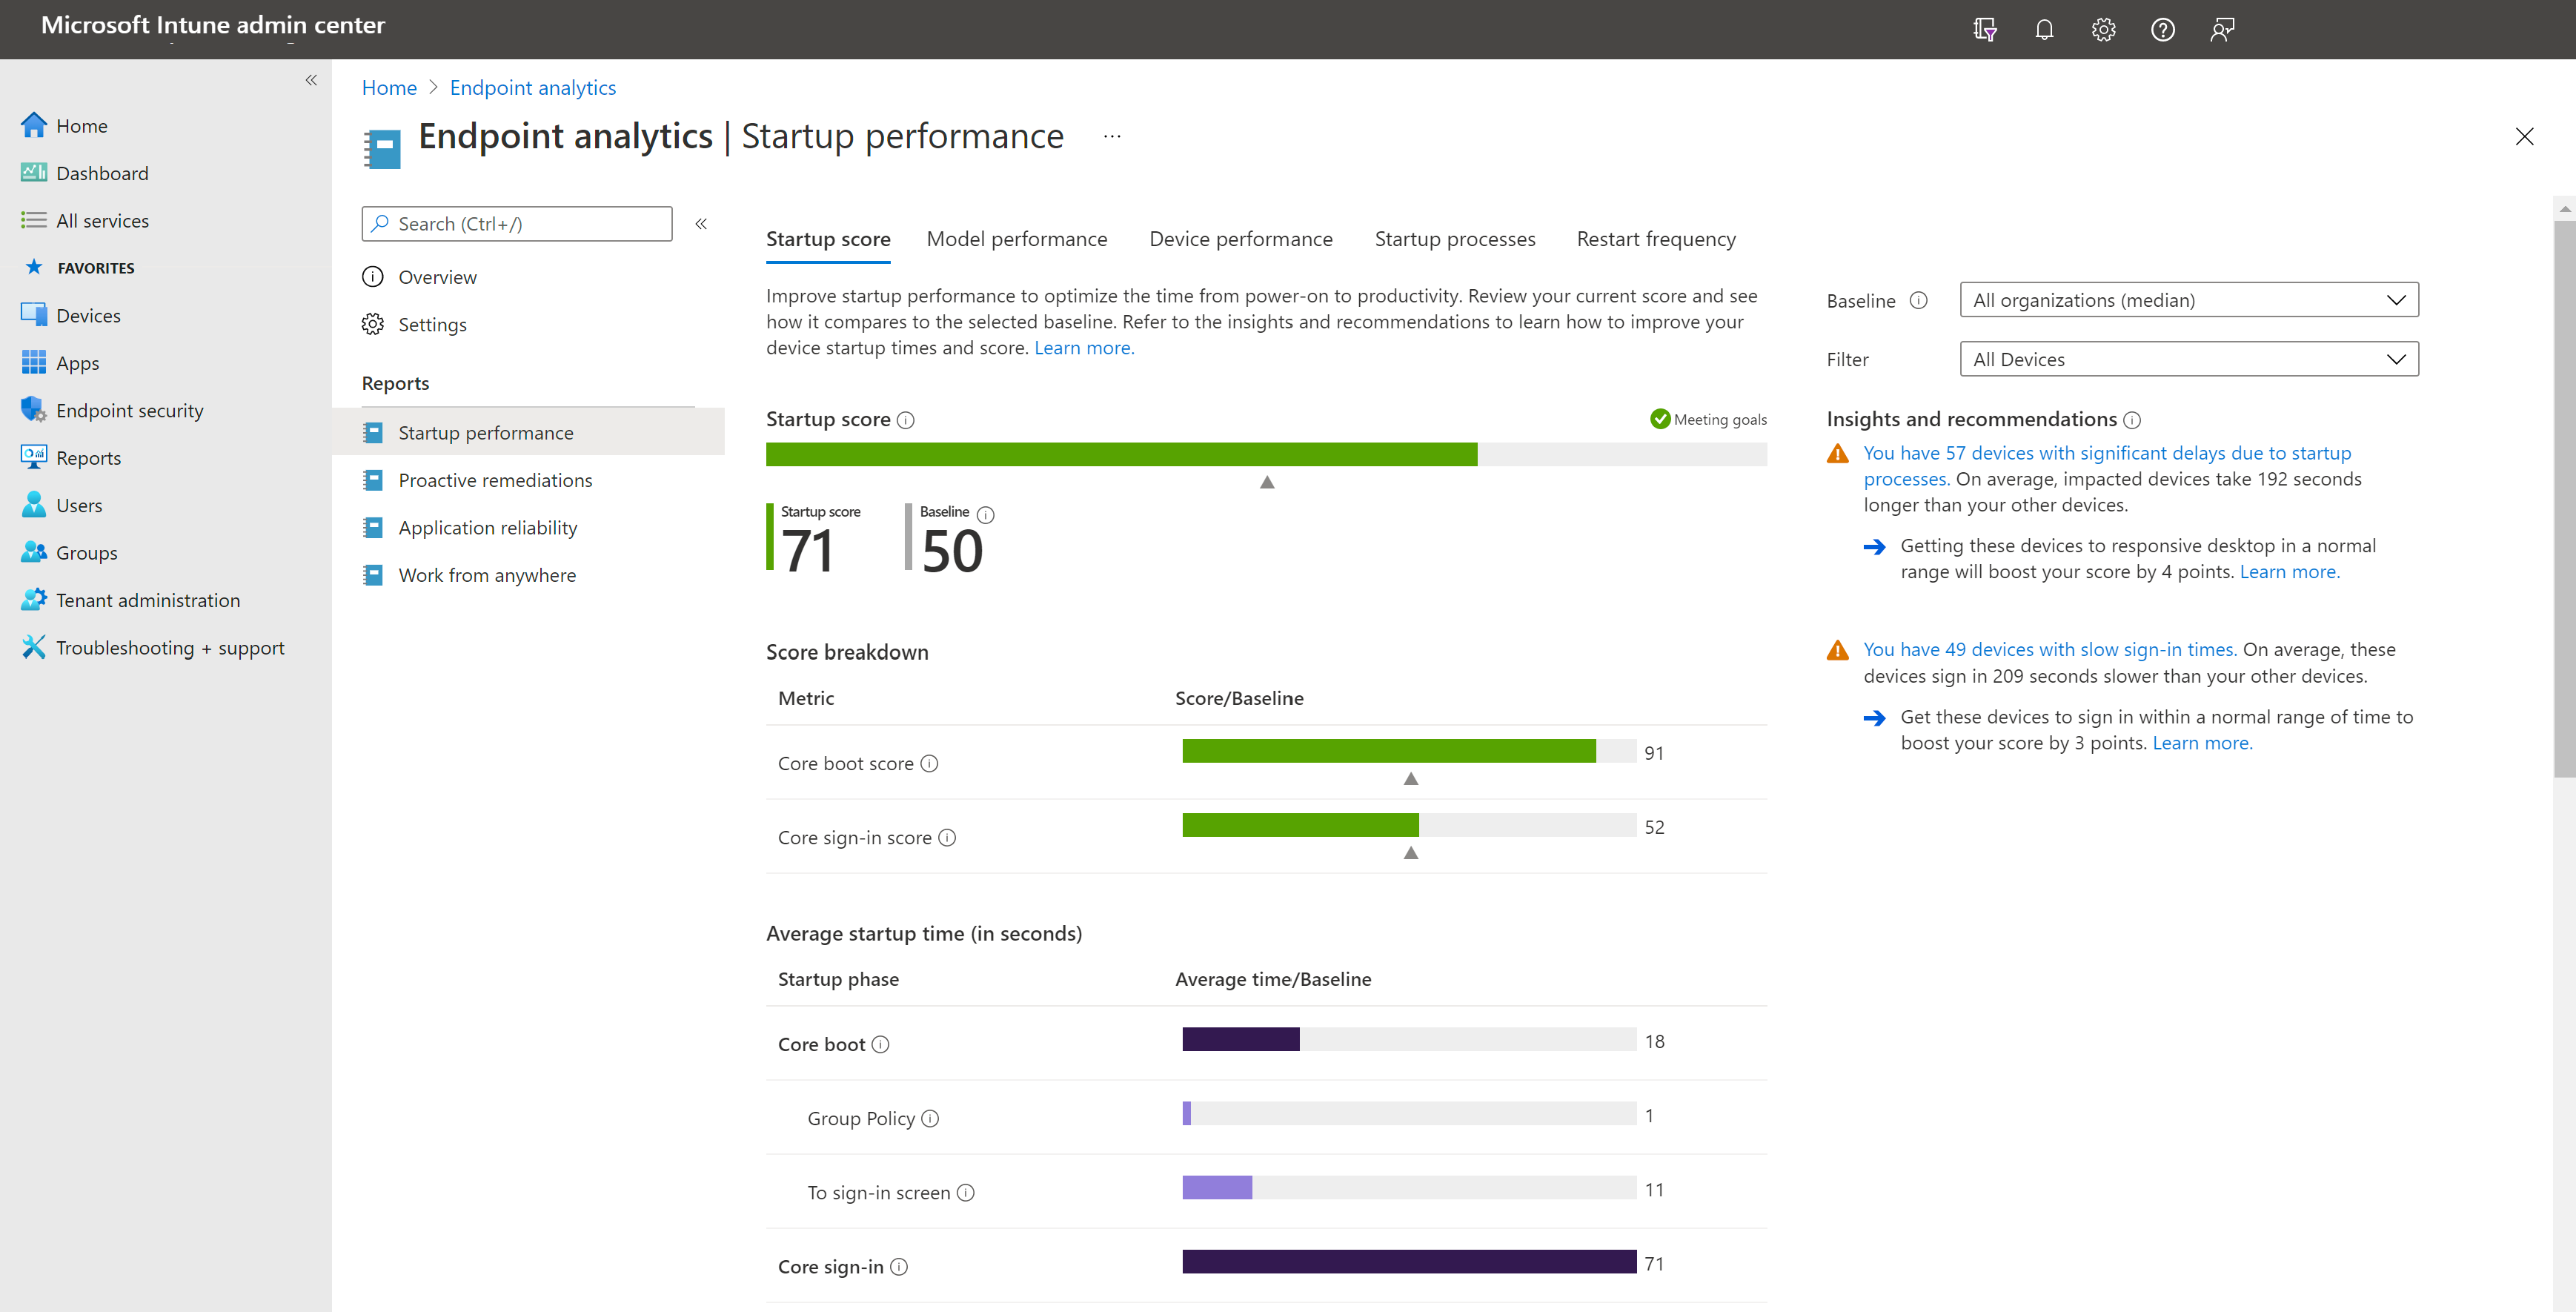 Screenshot of the startup score page showing an overall startup score of 61 and an all organizations baseline score of 50. Startup subscores are core boot phase at 77 and core sign-in at 46. Under the core sign-in subscore, the average time to responsive desktop is 54 seconds. Insights and recommendations show 40 devices are taking 166 seconds longer than other devices due to startup process delays